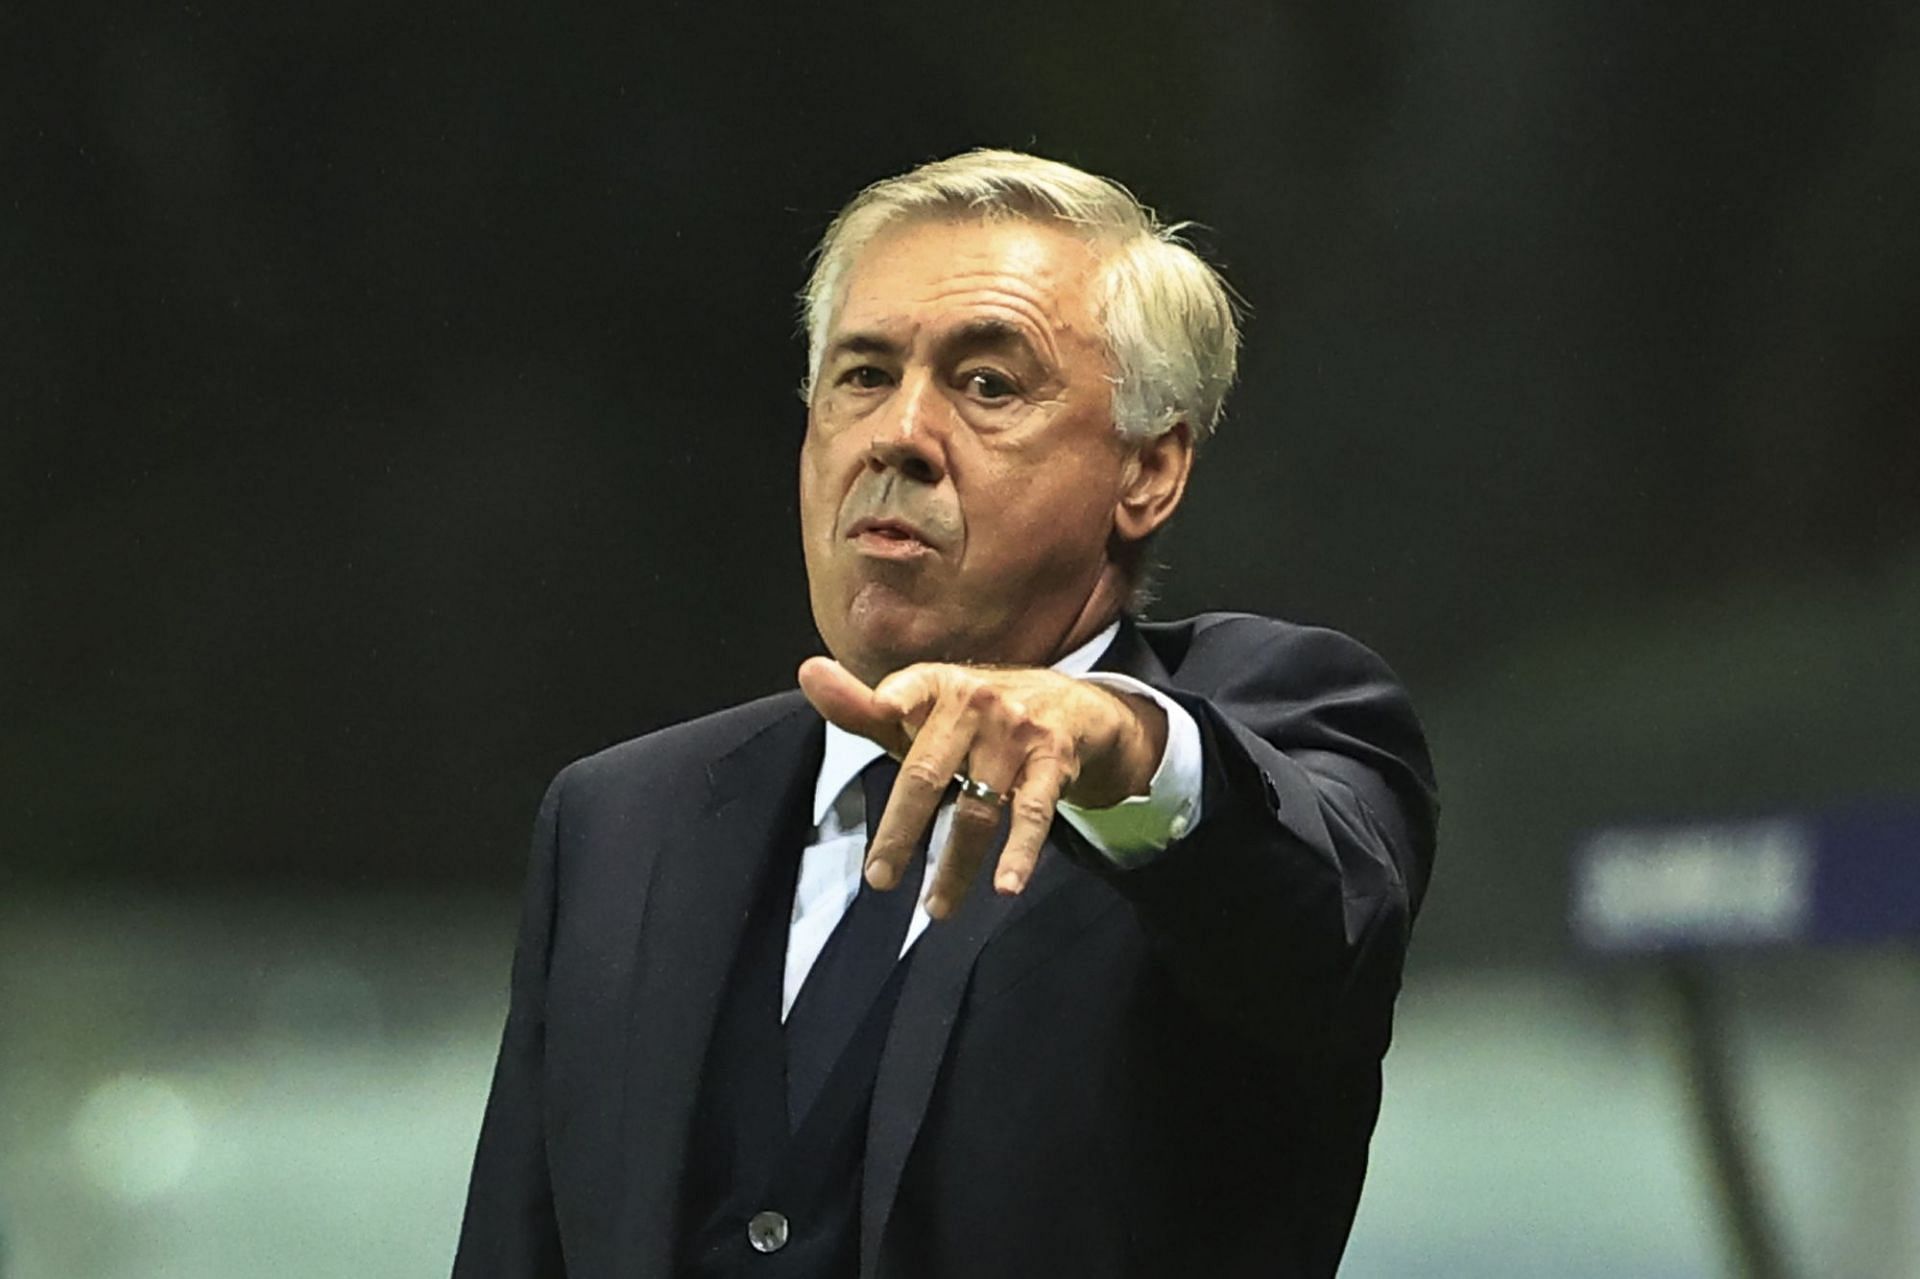 Ancelotti emphasised the need to get all three points.